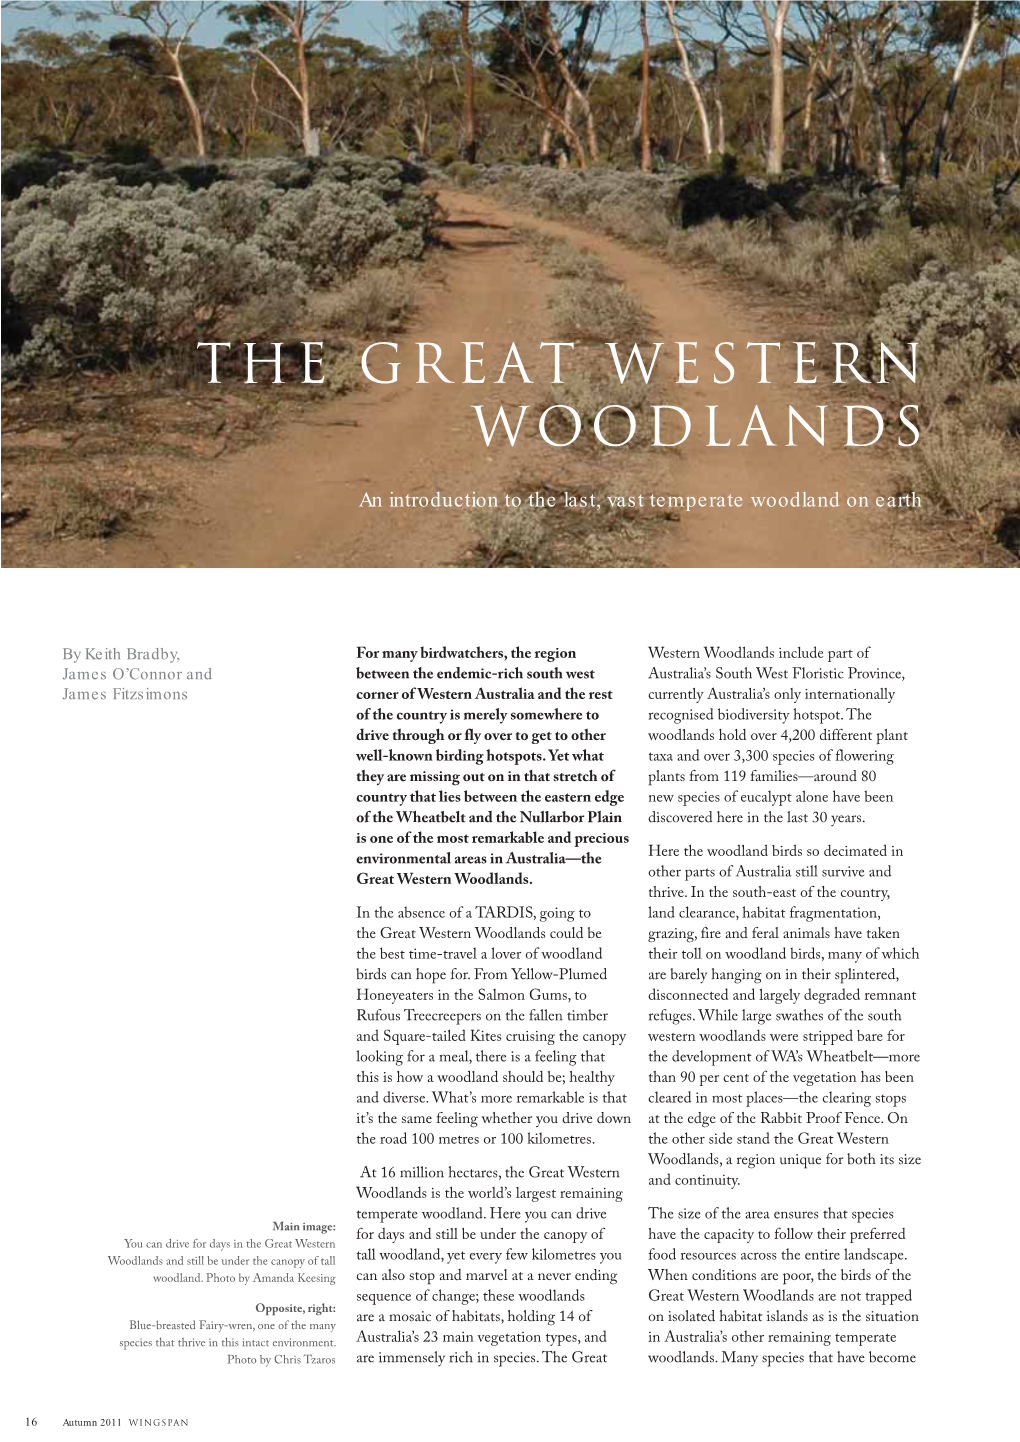 The Great Western Woodlands